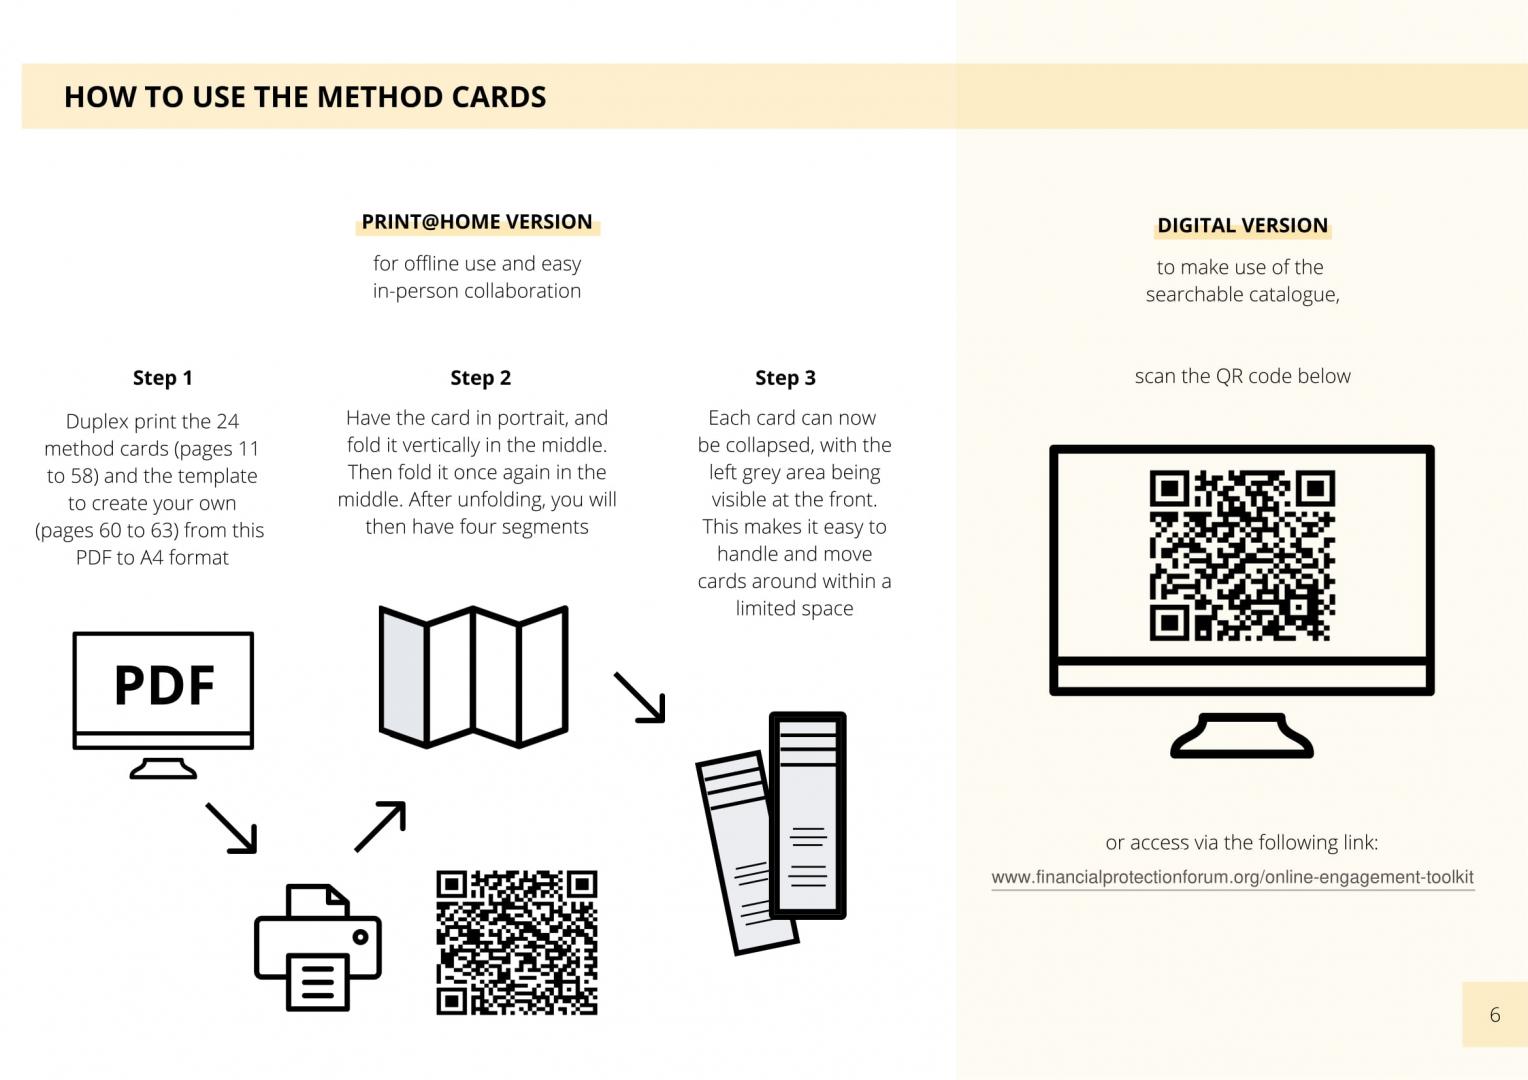 HOW TO USE THE METHOD CARDS